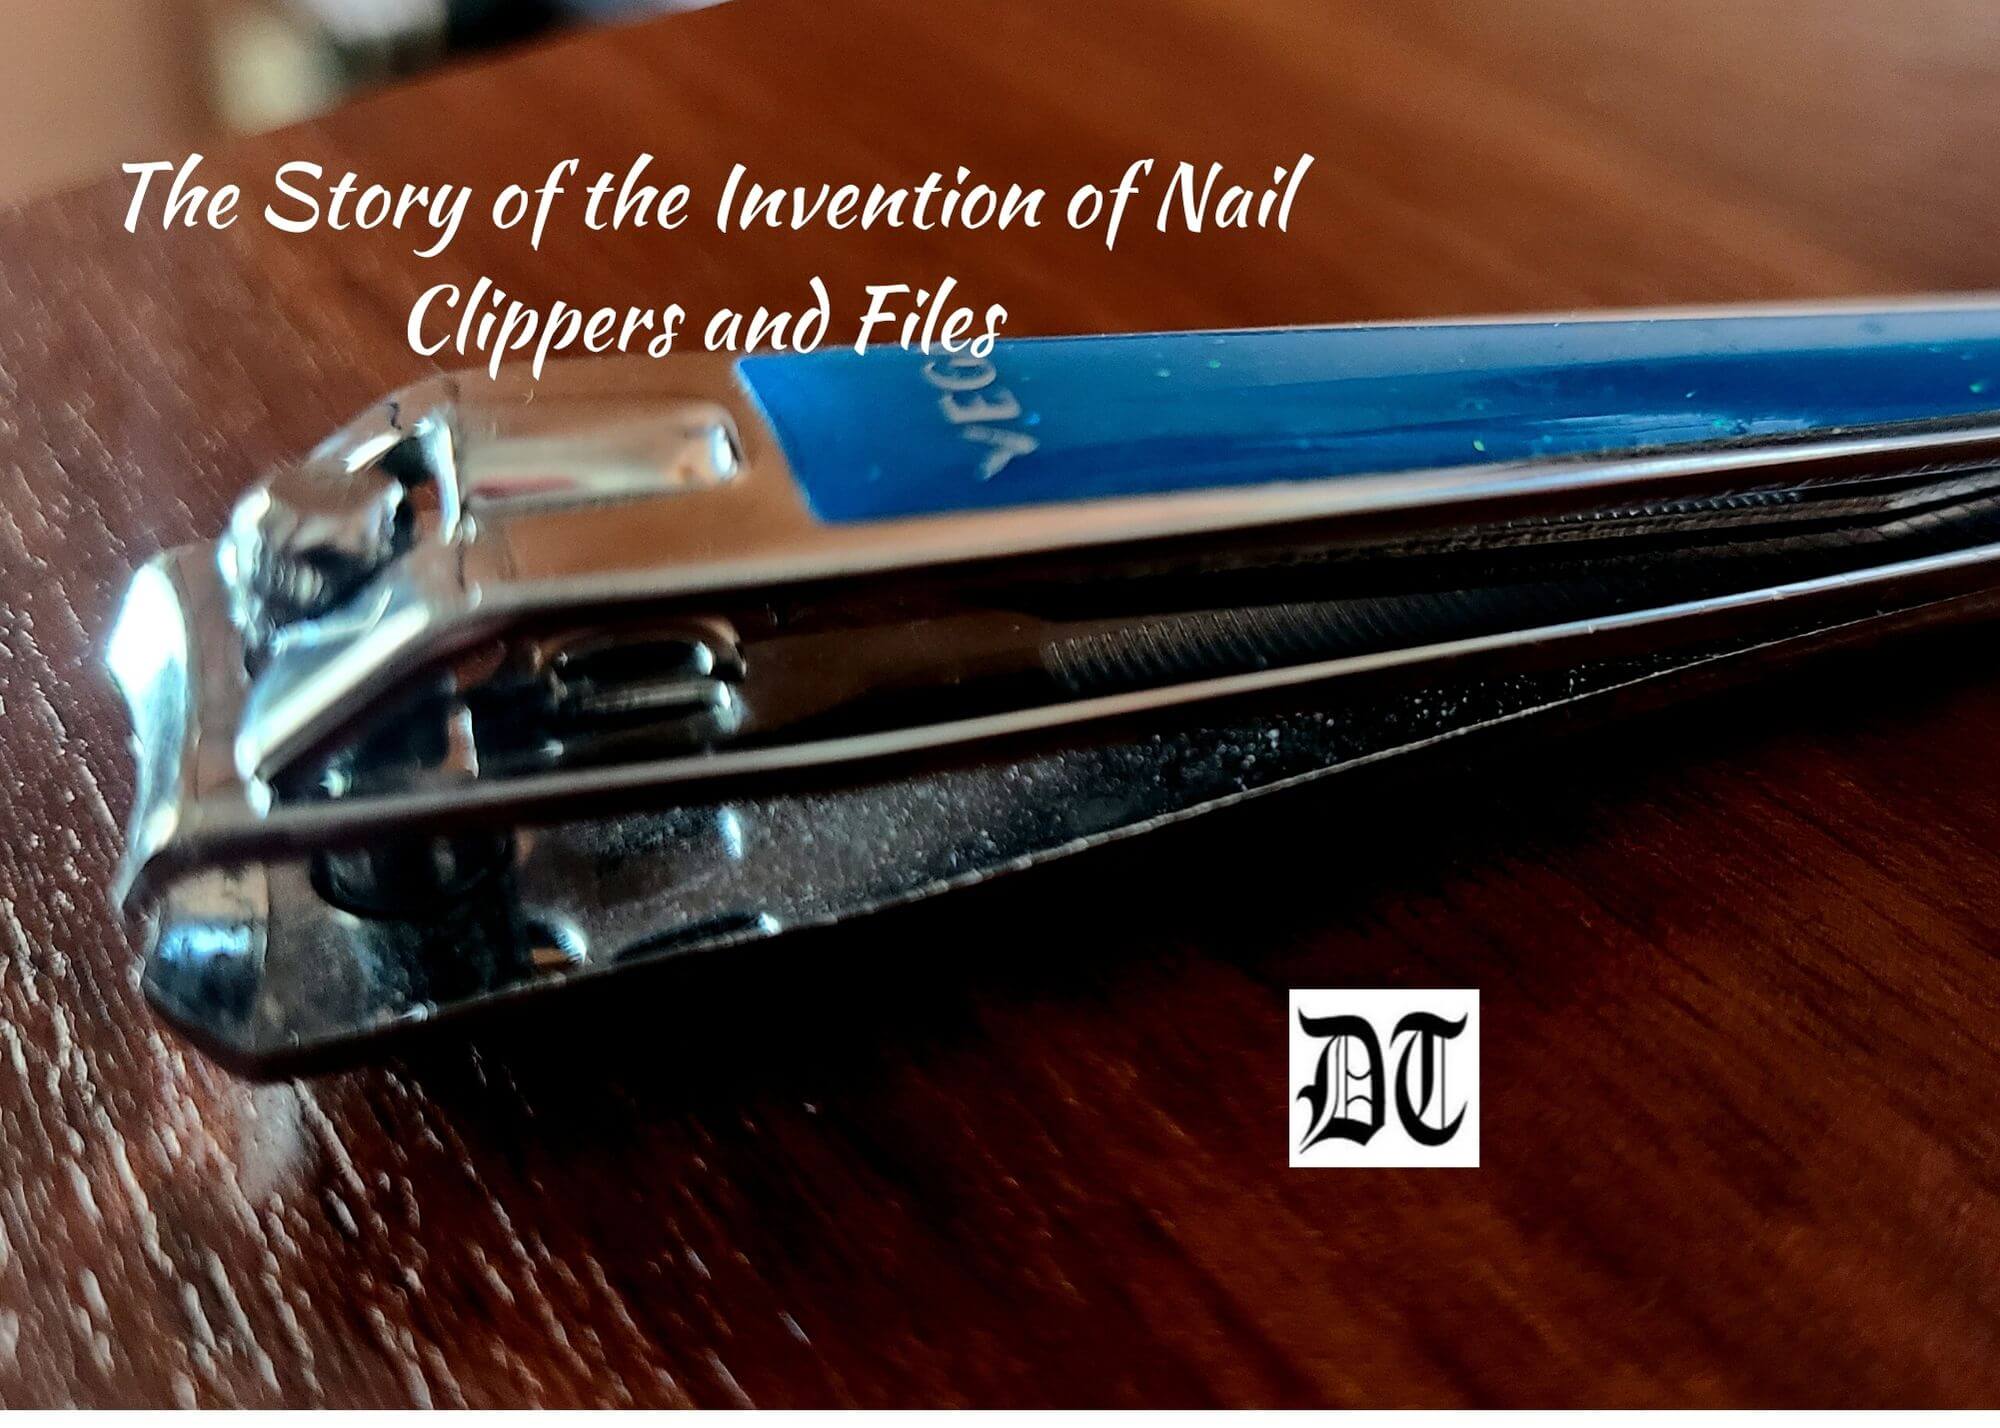 The Story of the Invention of Nail Clippers and Files - Different Truths